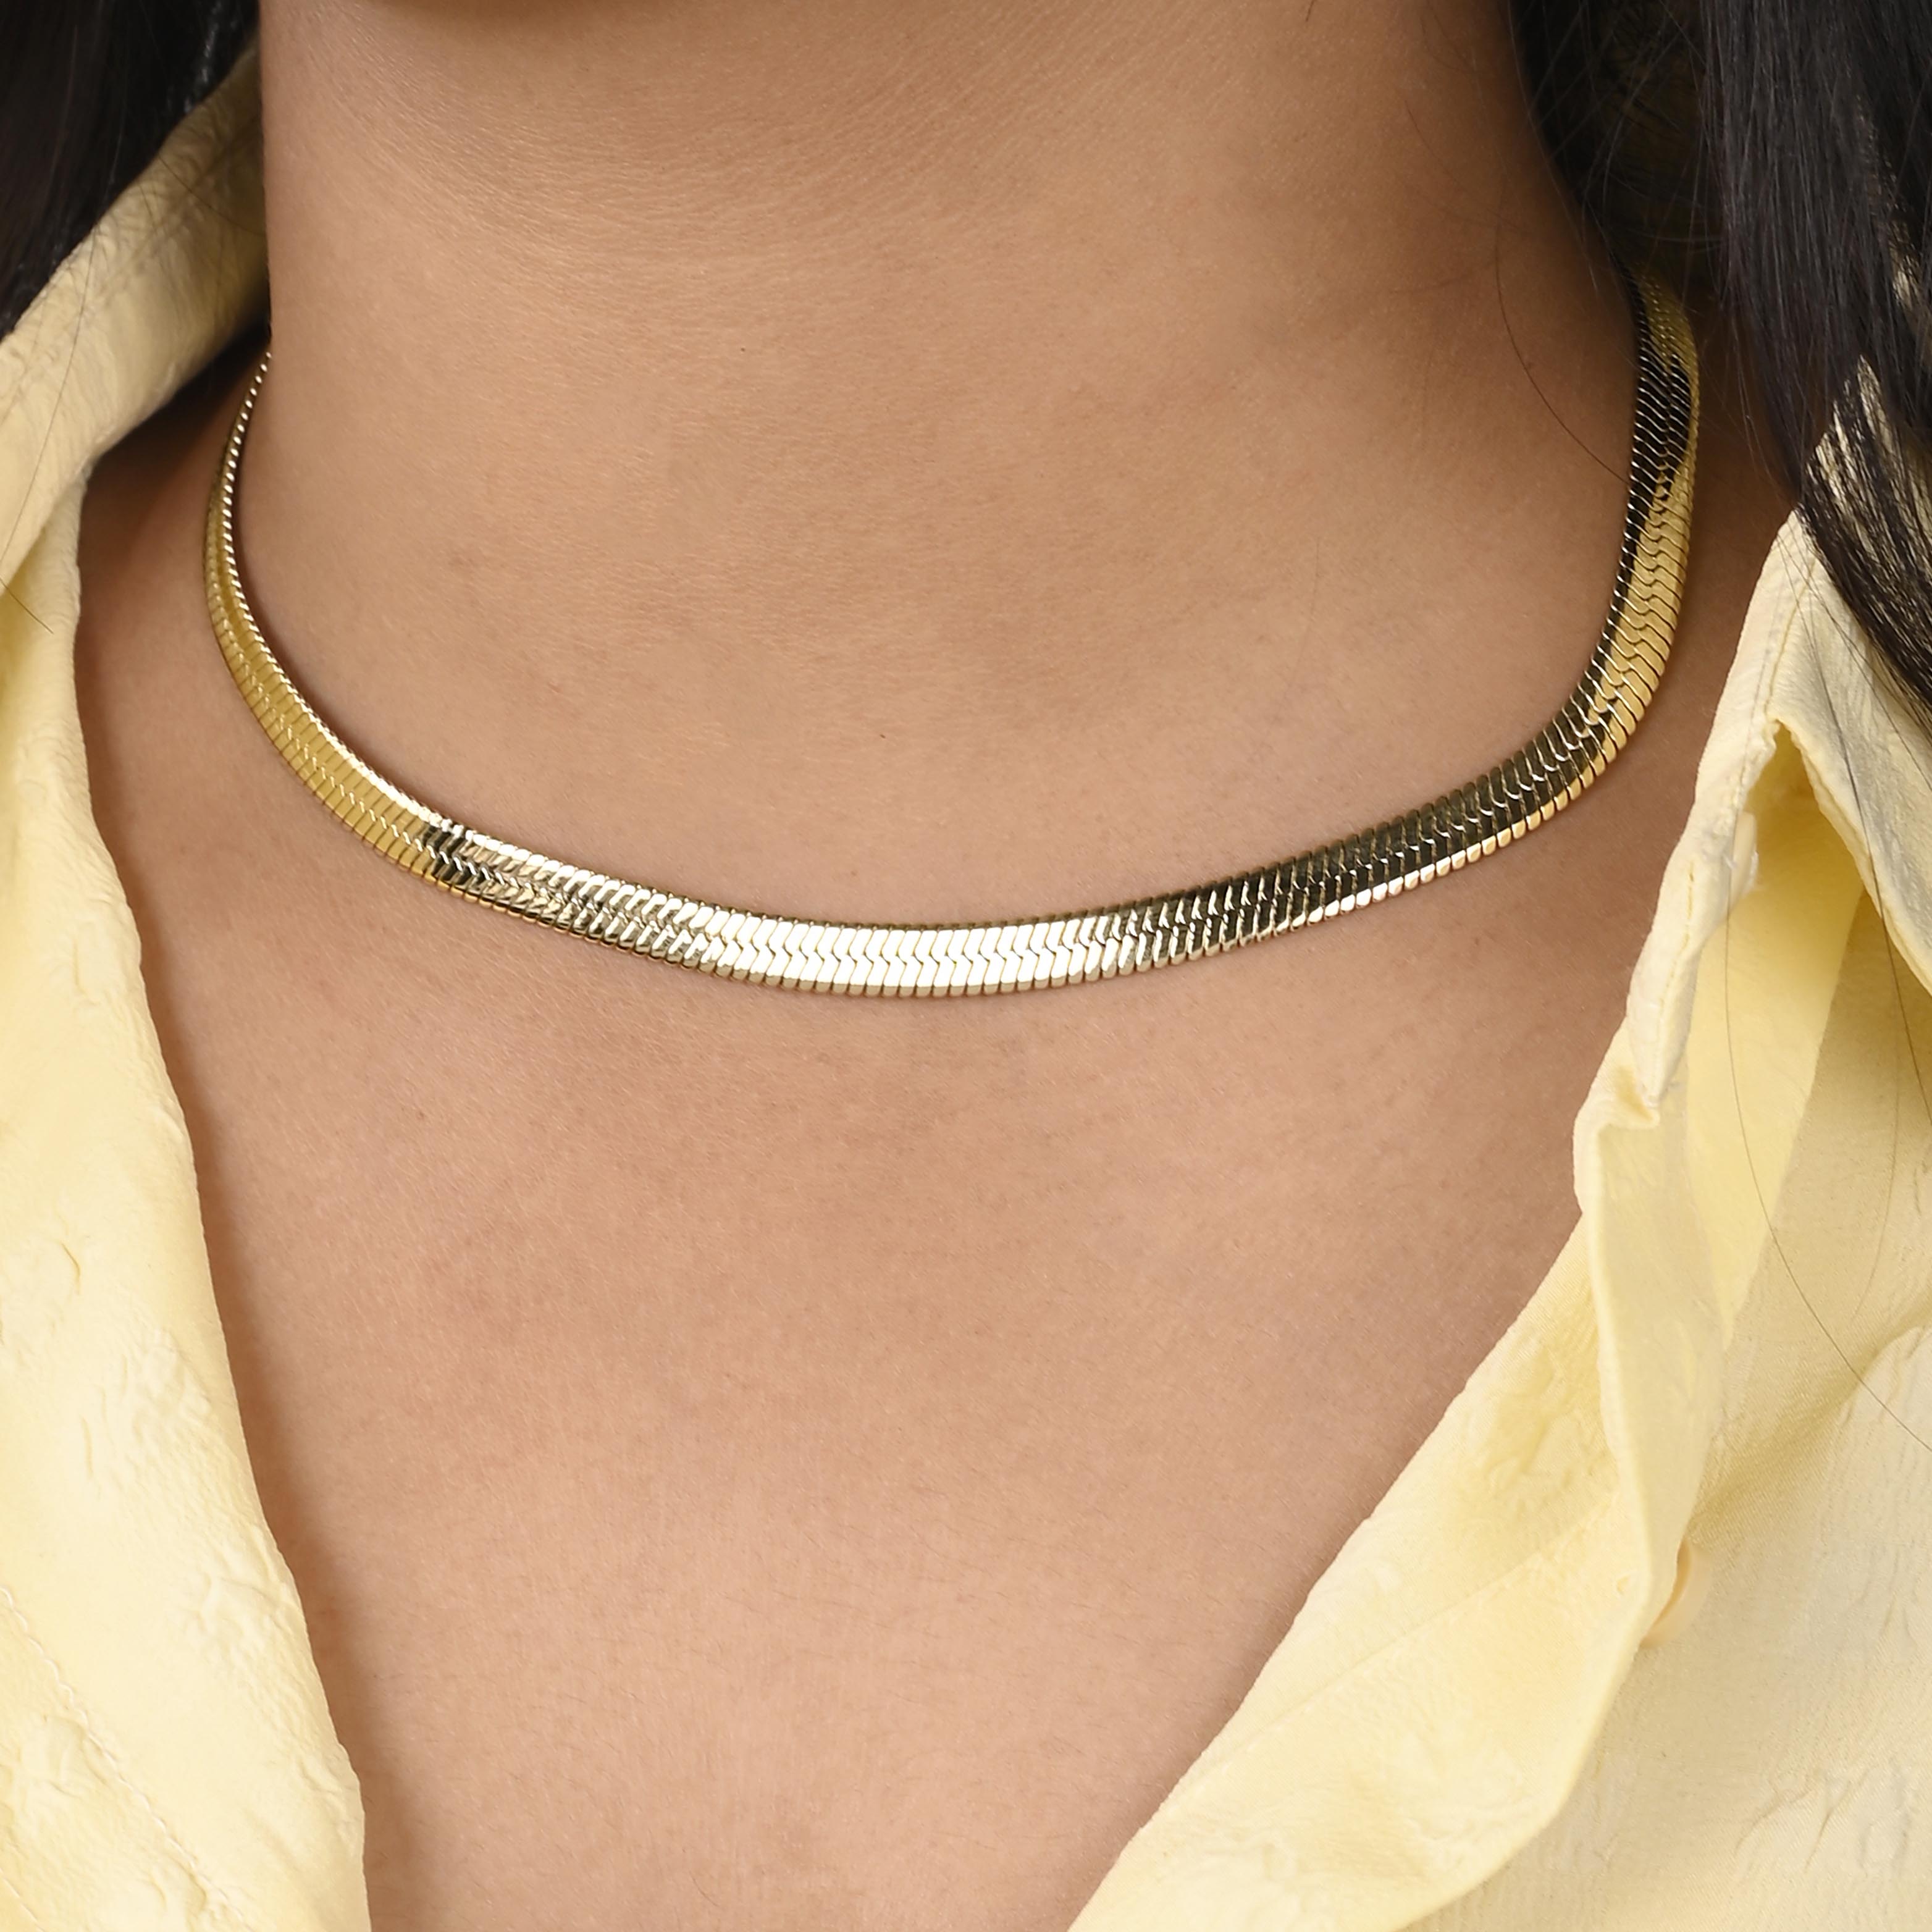 Snake Chain Necklace - Statement Necklaces - Gold-Plated & Hypoallergenic Jewellery - Made in India - Dubai Jewellery - Dori